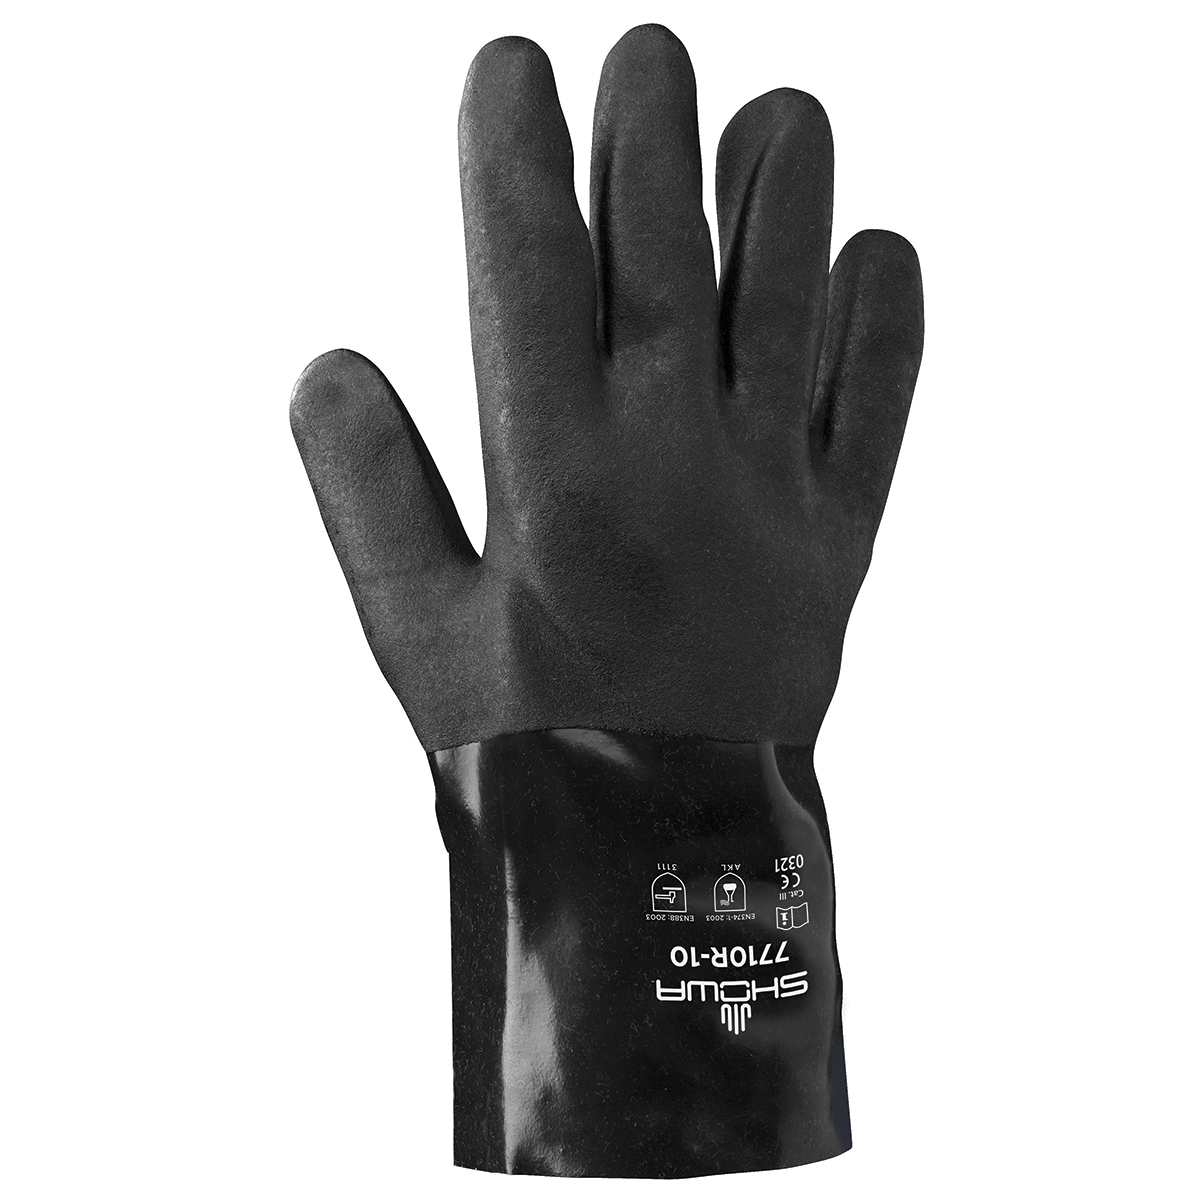 Chemical resistant PVC fully coated 10" gauntlet w/jersey liner, Sanitized, black, rough finish, large